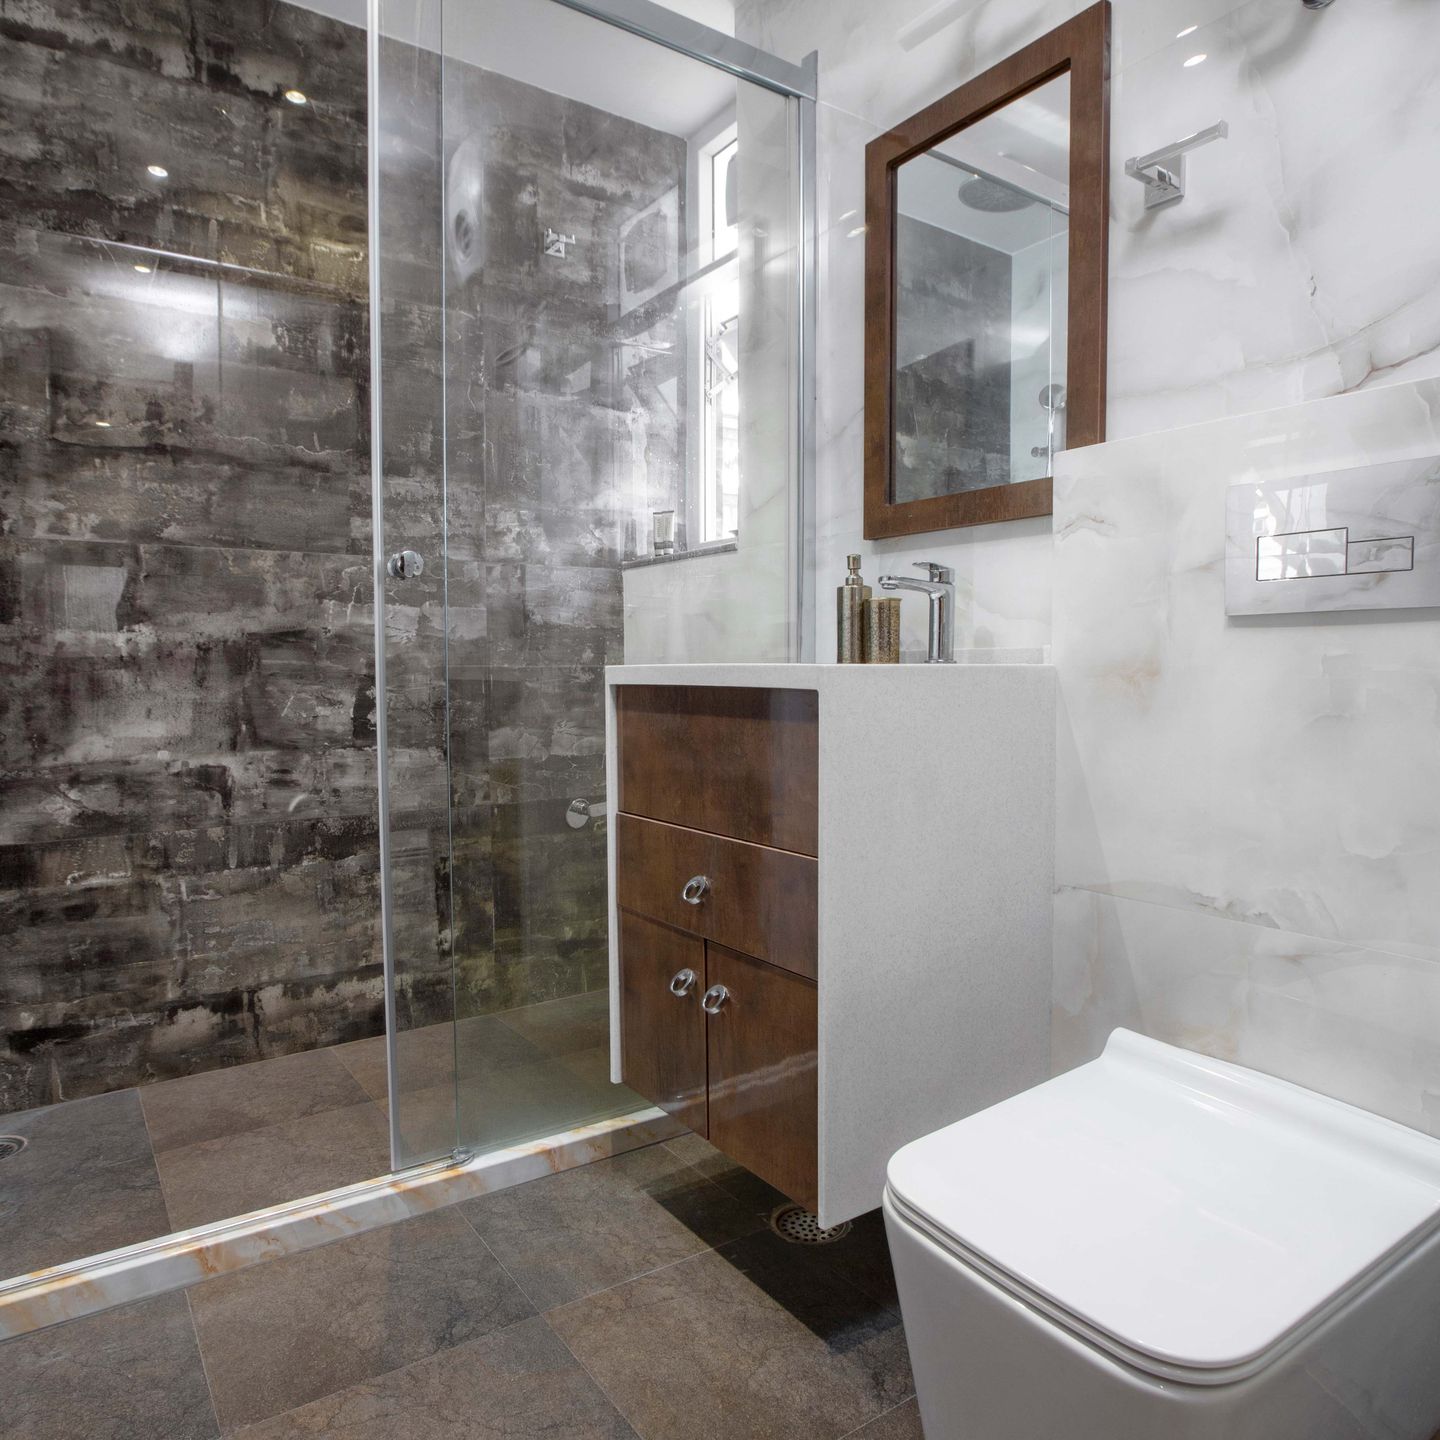 Small Bathroom Design With Black And White Tiles - Livspace